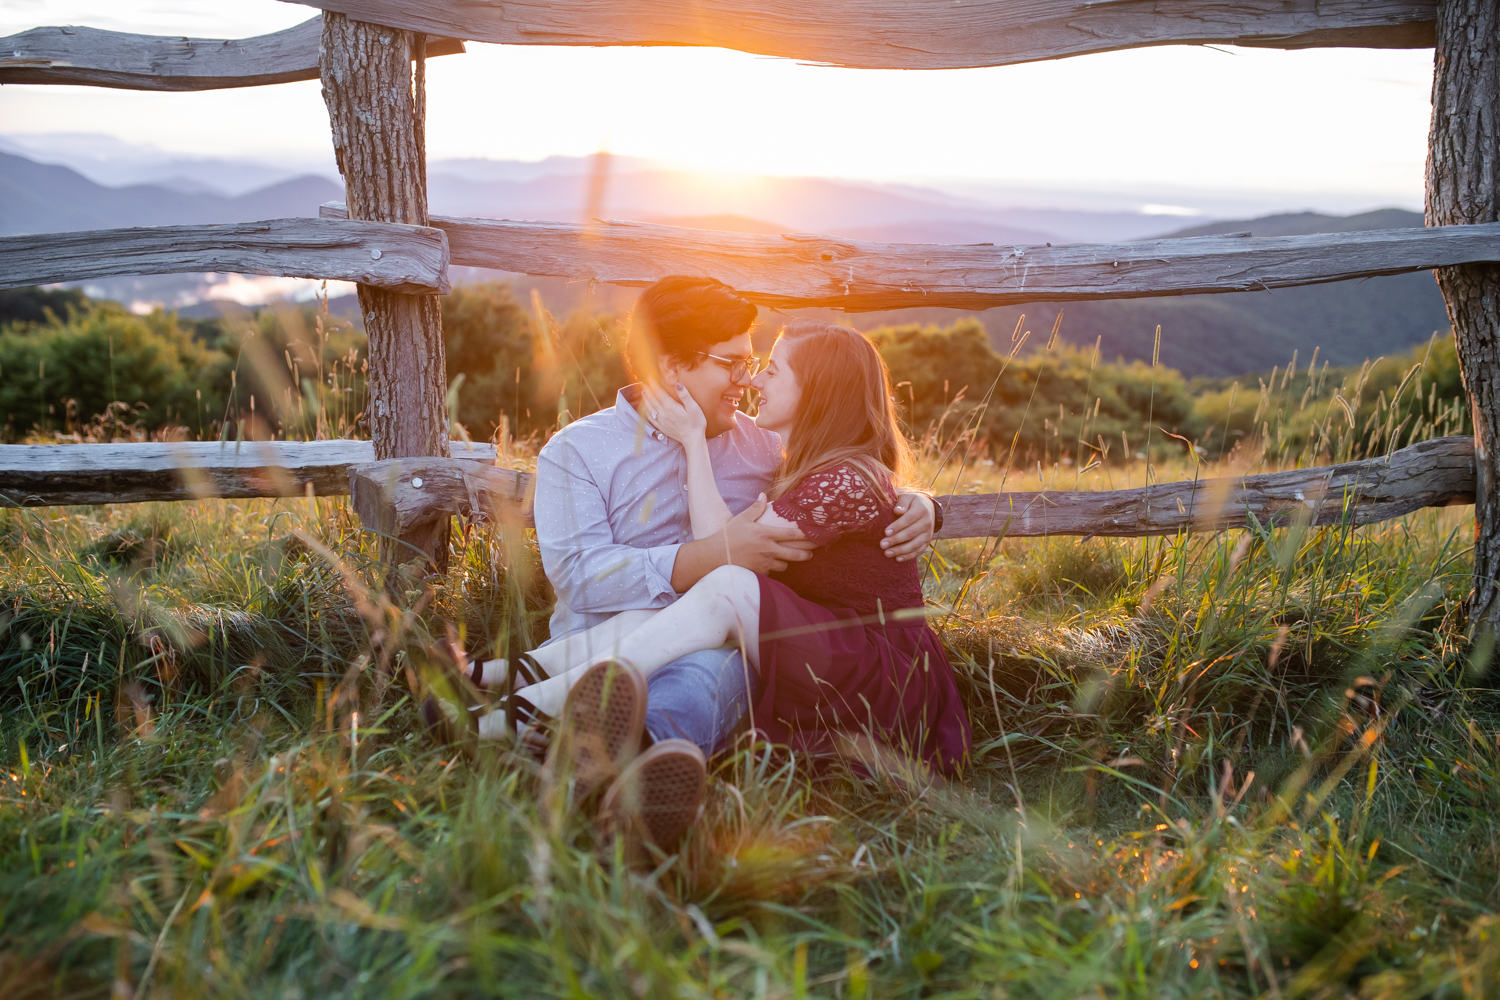 Boy and girl sitting in a field kissing again a wooden fence in front of a sunset at Max Patch NC.